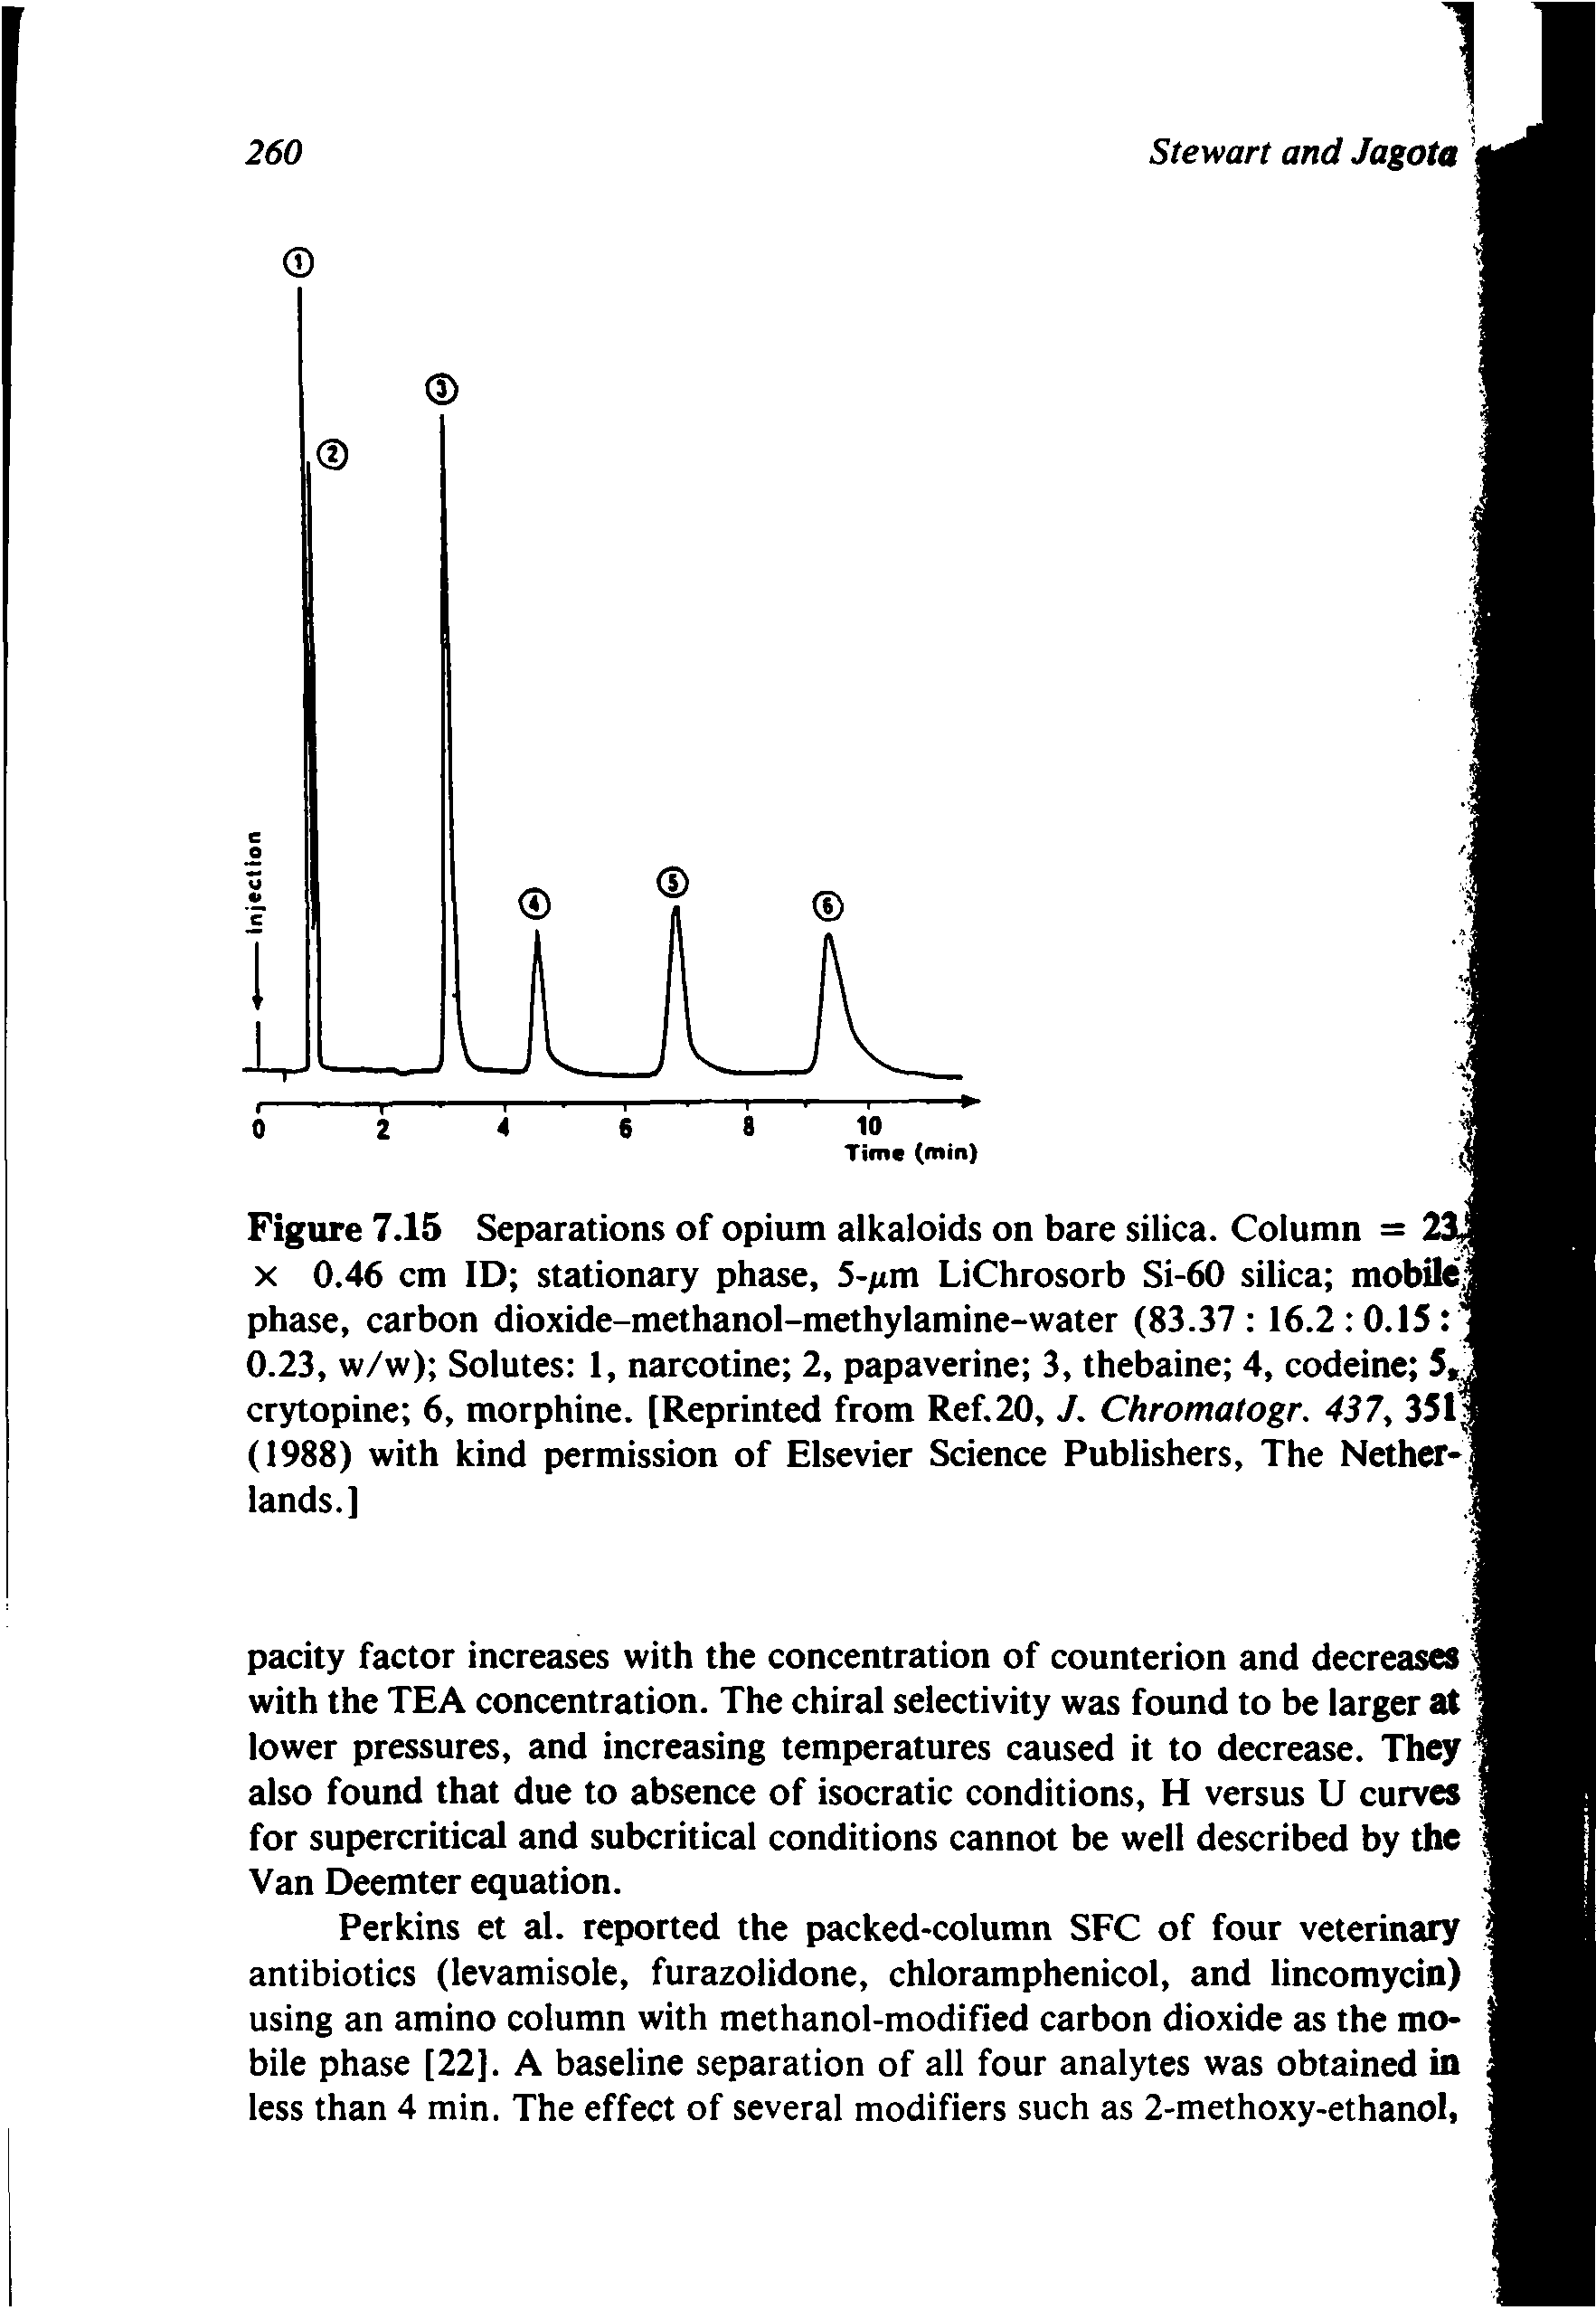 Figure 7.15 Separations of opium alkaloids on bare silica. Column = x 0.46 cm ID stationary phase, 5-/im LiChrosorb Si-60 silica mobile phase, carbon dioxide-methanol-methylamine-water (83.37 16.2 0.15 0.23, w/w) Solutes 1, narcotine 2, papaverine 3, thebaine 4, codeine 5, crytopine 6, morphine. [Reprinted from Ref.20, J. Chromatogr. 437, 351 (1988) with kind permission of Elsevier Science Publishers, The Nether-, lands.]...